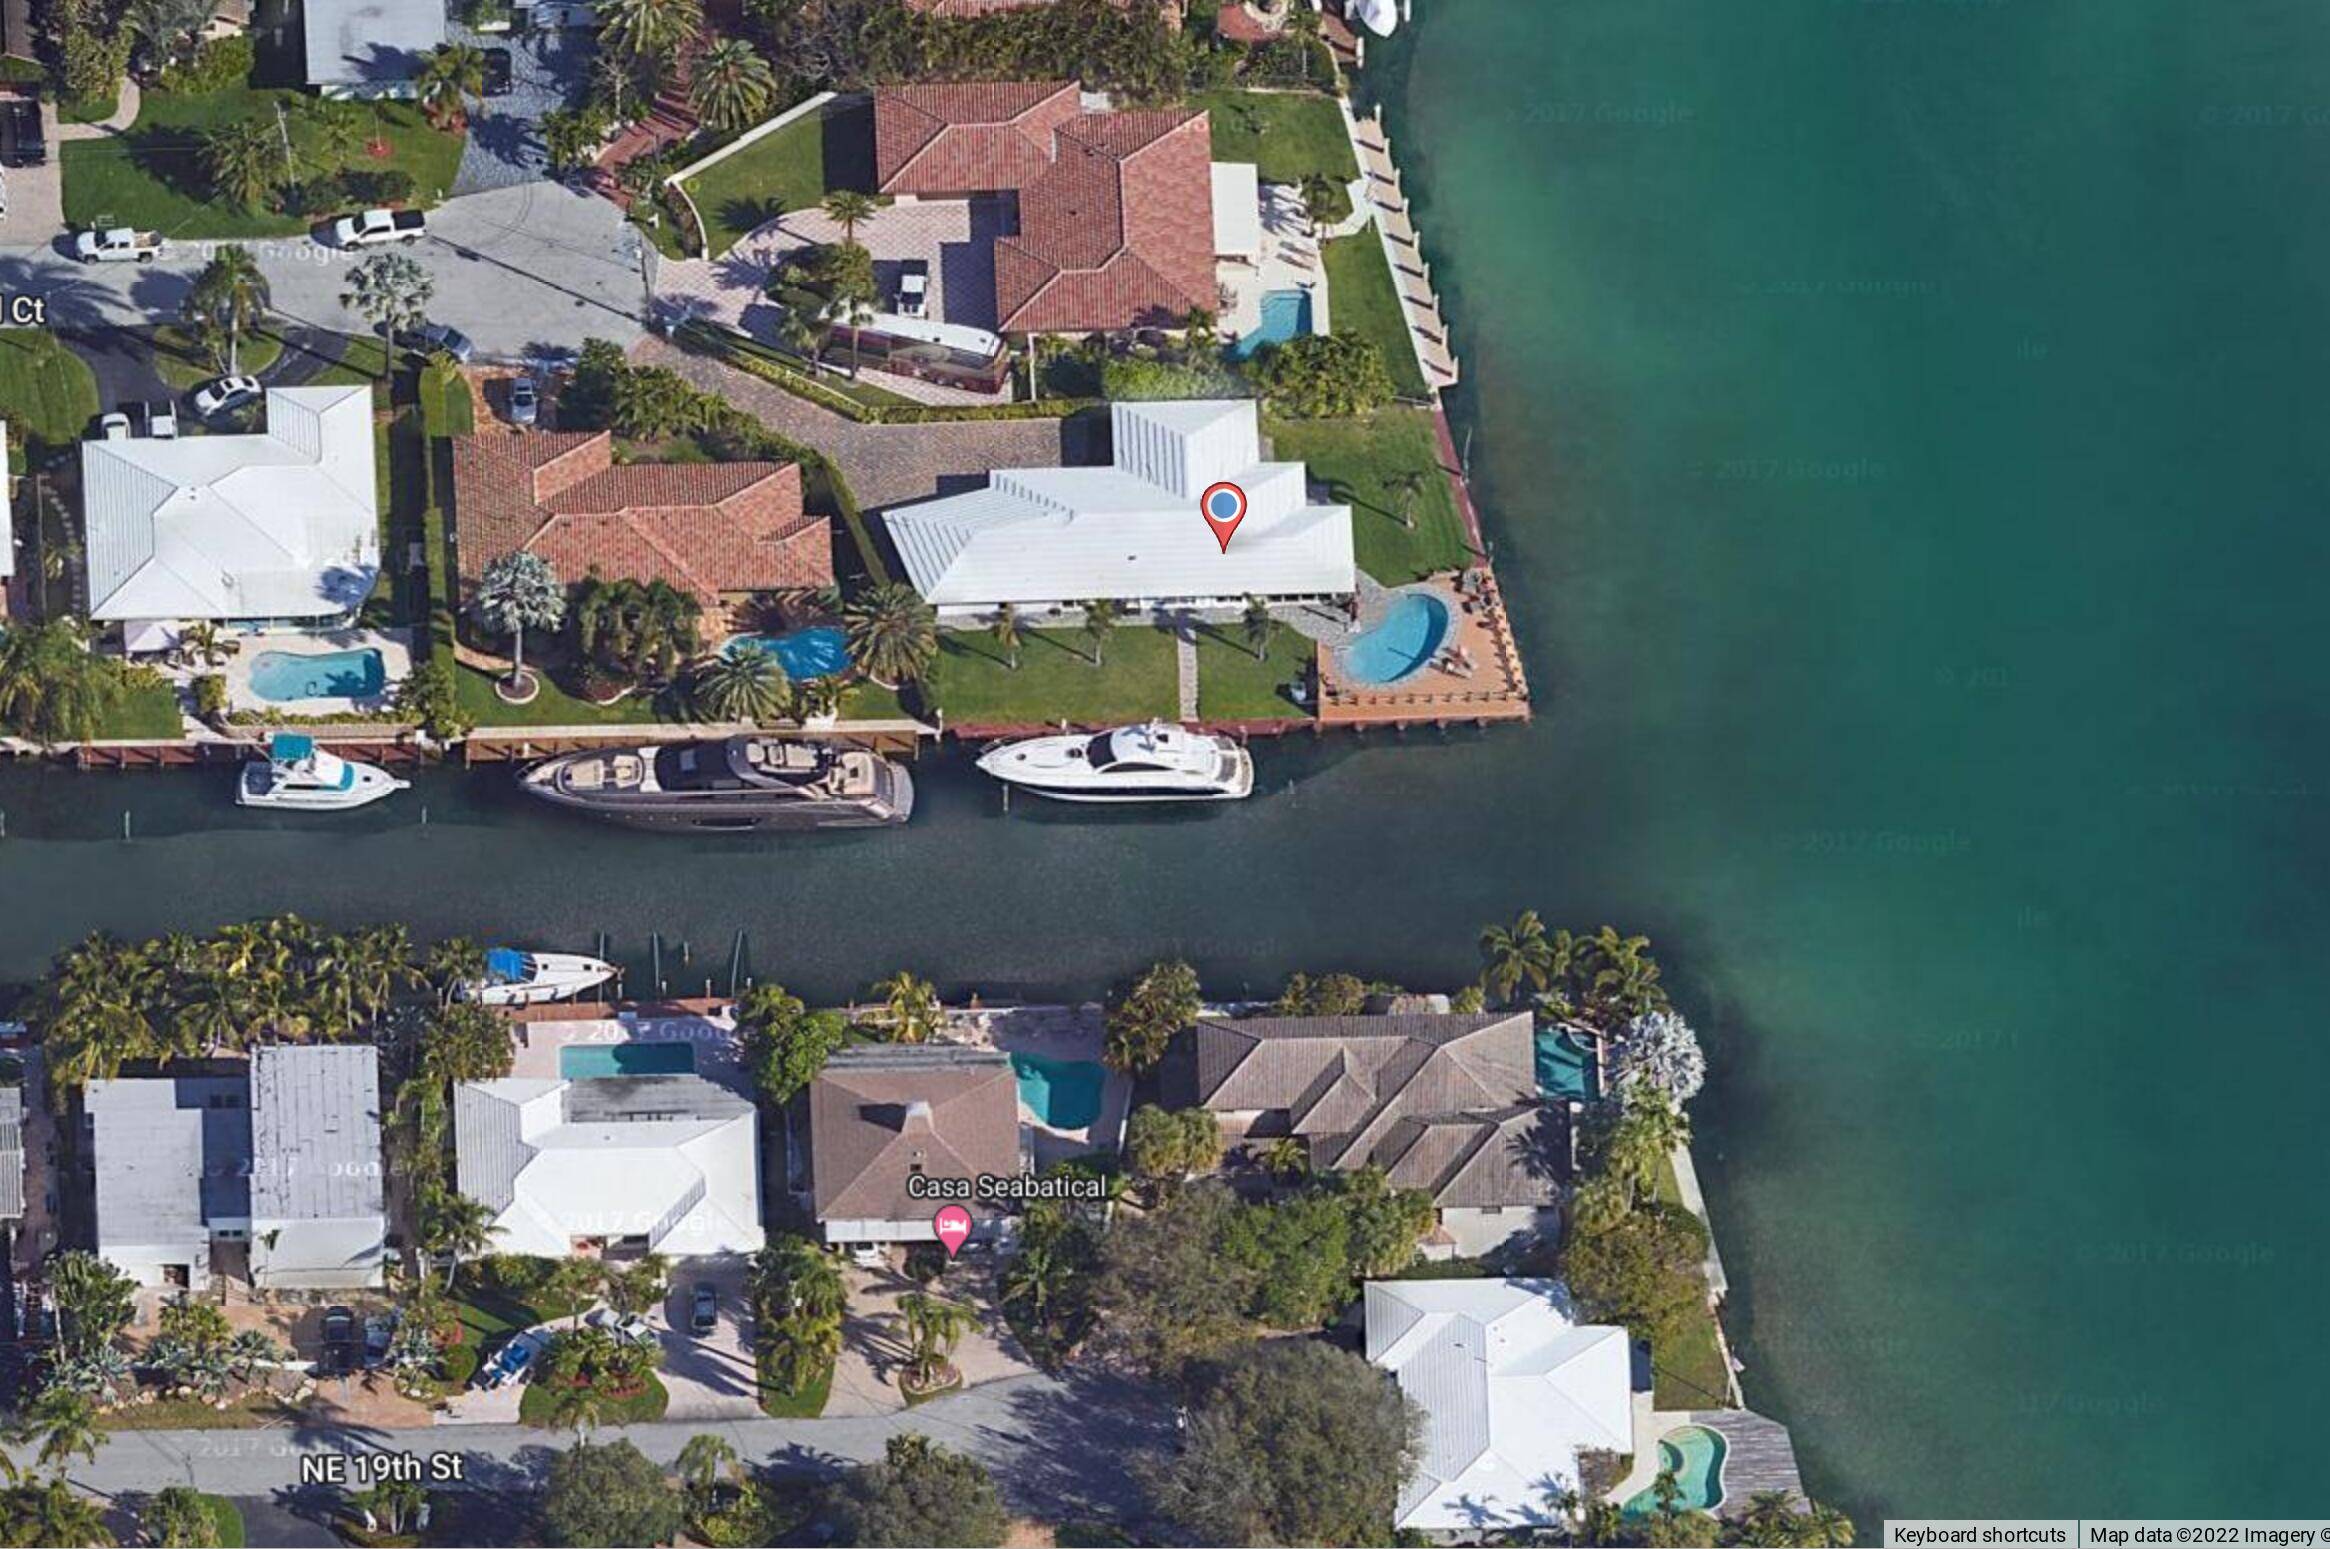 Rent this spectacular waterfront home located in South Florida's sunny trendy Pompano Beach.